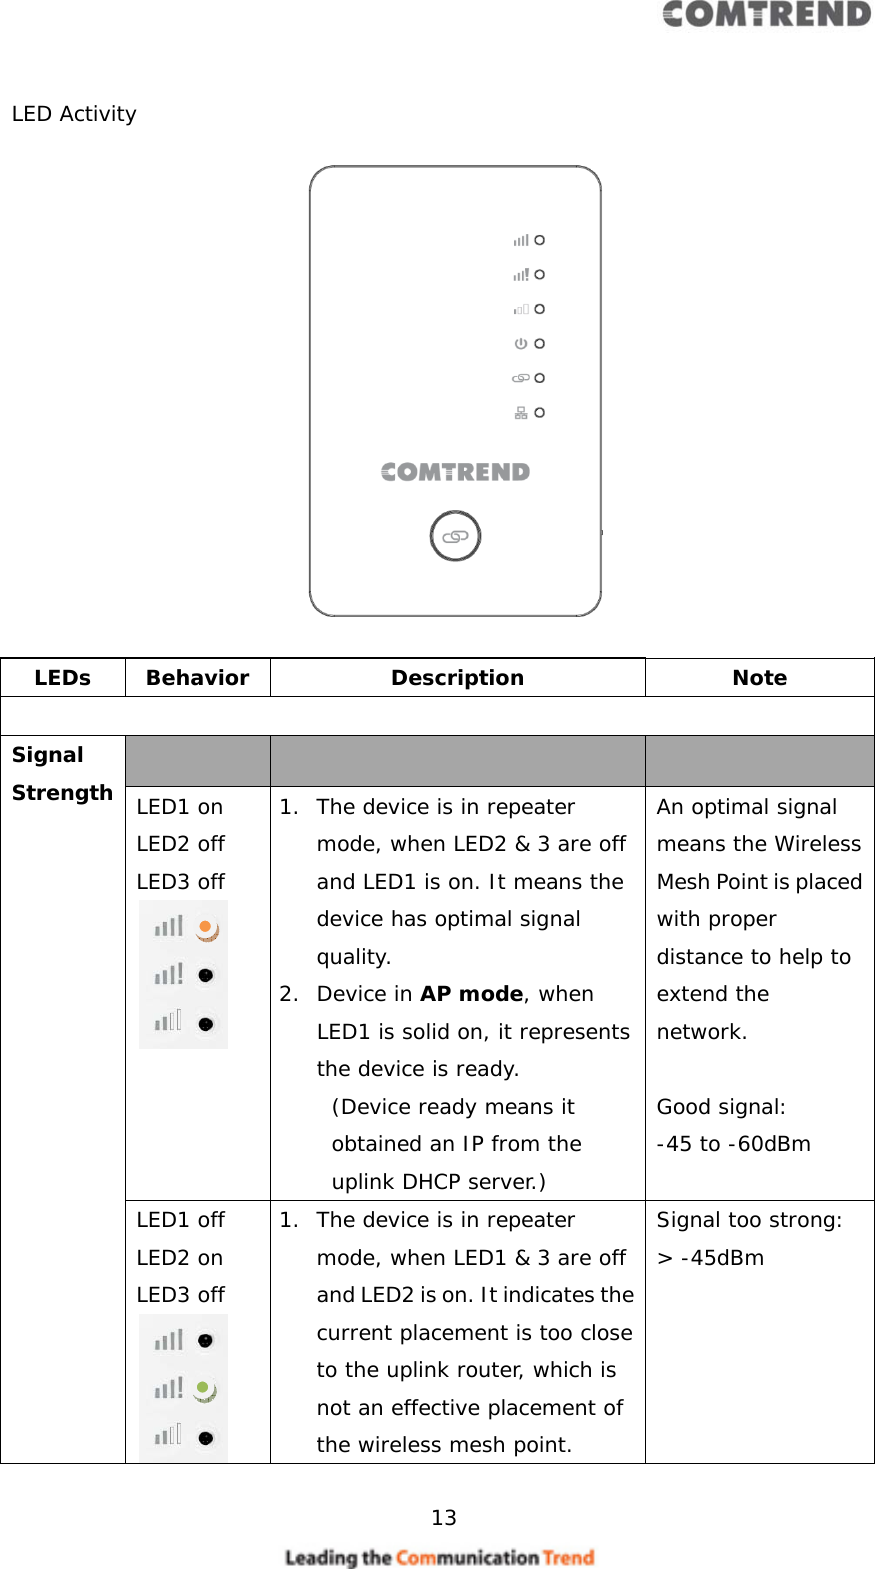     13   LED Activity               LEDs Behavior  Description  Note  Signal Strength      LED1 on LED2 off LED3 off  1. The device is in repeater mode, when LED2 &amp; 3 are off and LED1 is on. It means the device has optimal signal quality. 2. Device in AP mode, when LED1 is solid on, it represents the device is ready.  (Device ready means it obtained an IP from the uplink DHCP server.) An optimal signal means the Wireless Mesh Point is placed with proper distance to help to extend the network.  Good signal: -45 to -60dBm LED1 off LED2 on LED3 off  1. The device is in repeater mode, when LED1 &amp; 3 are off and LED2 is on. It indicates the current placement is too close to the uplink router, which is not an effective placement of the wireless mesh point. Signal too strong: &gt; -45dBm  